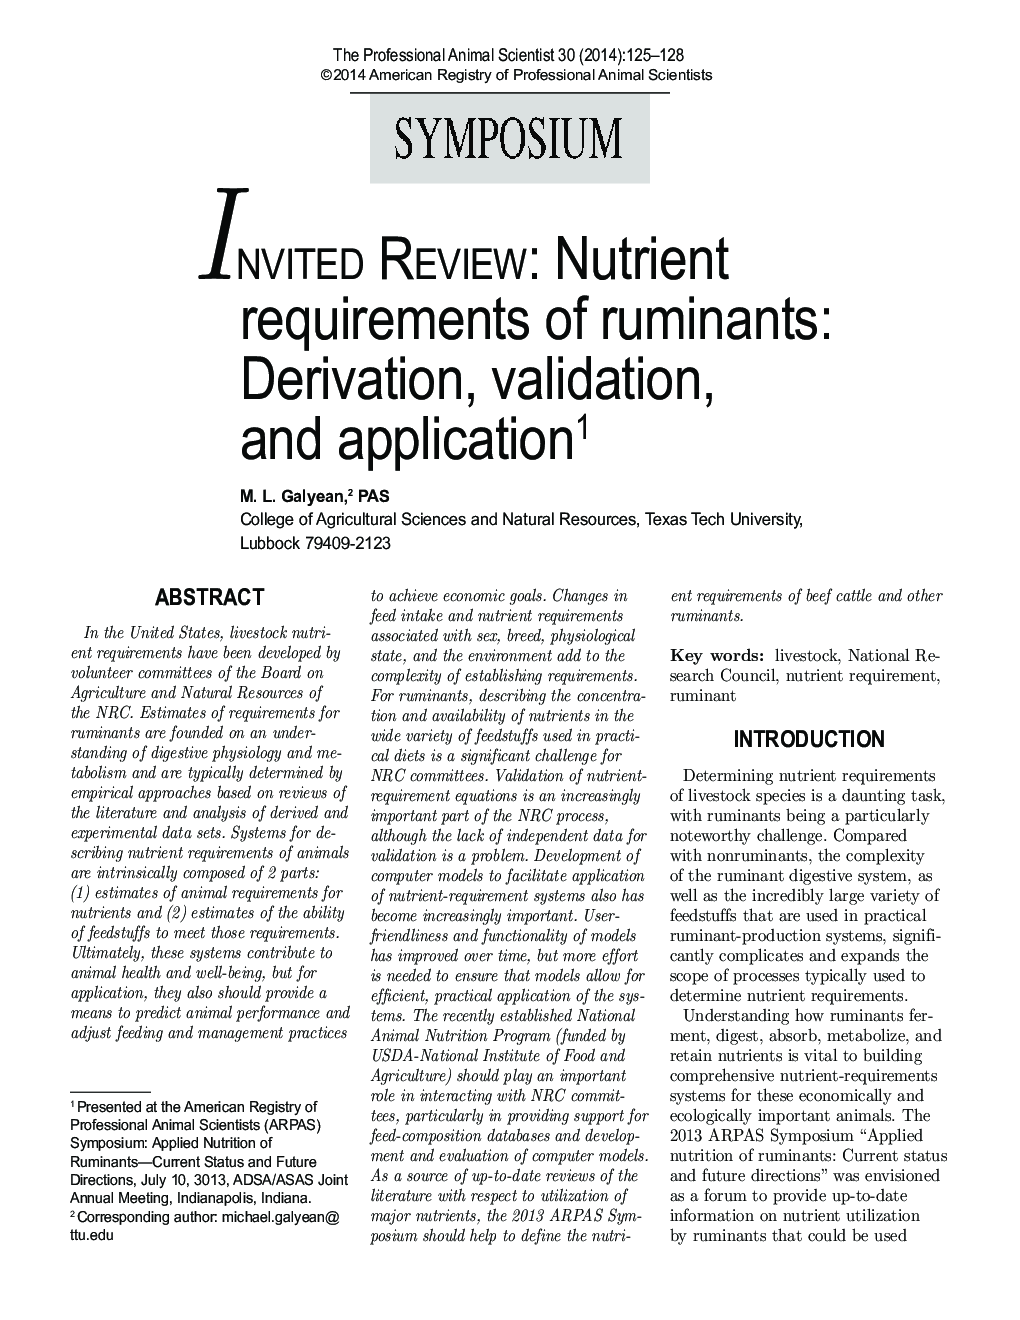 INVITED REVIEW: Nutrient requirements of ruminants: Derivation, validation, and application1